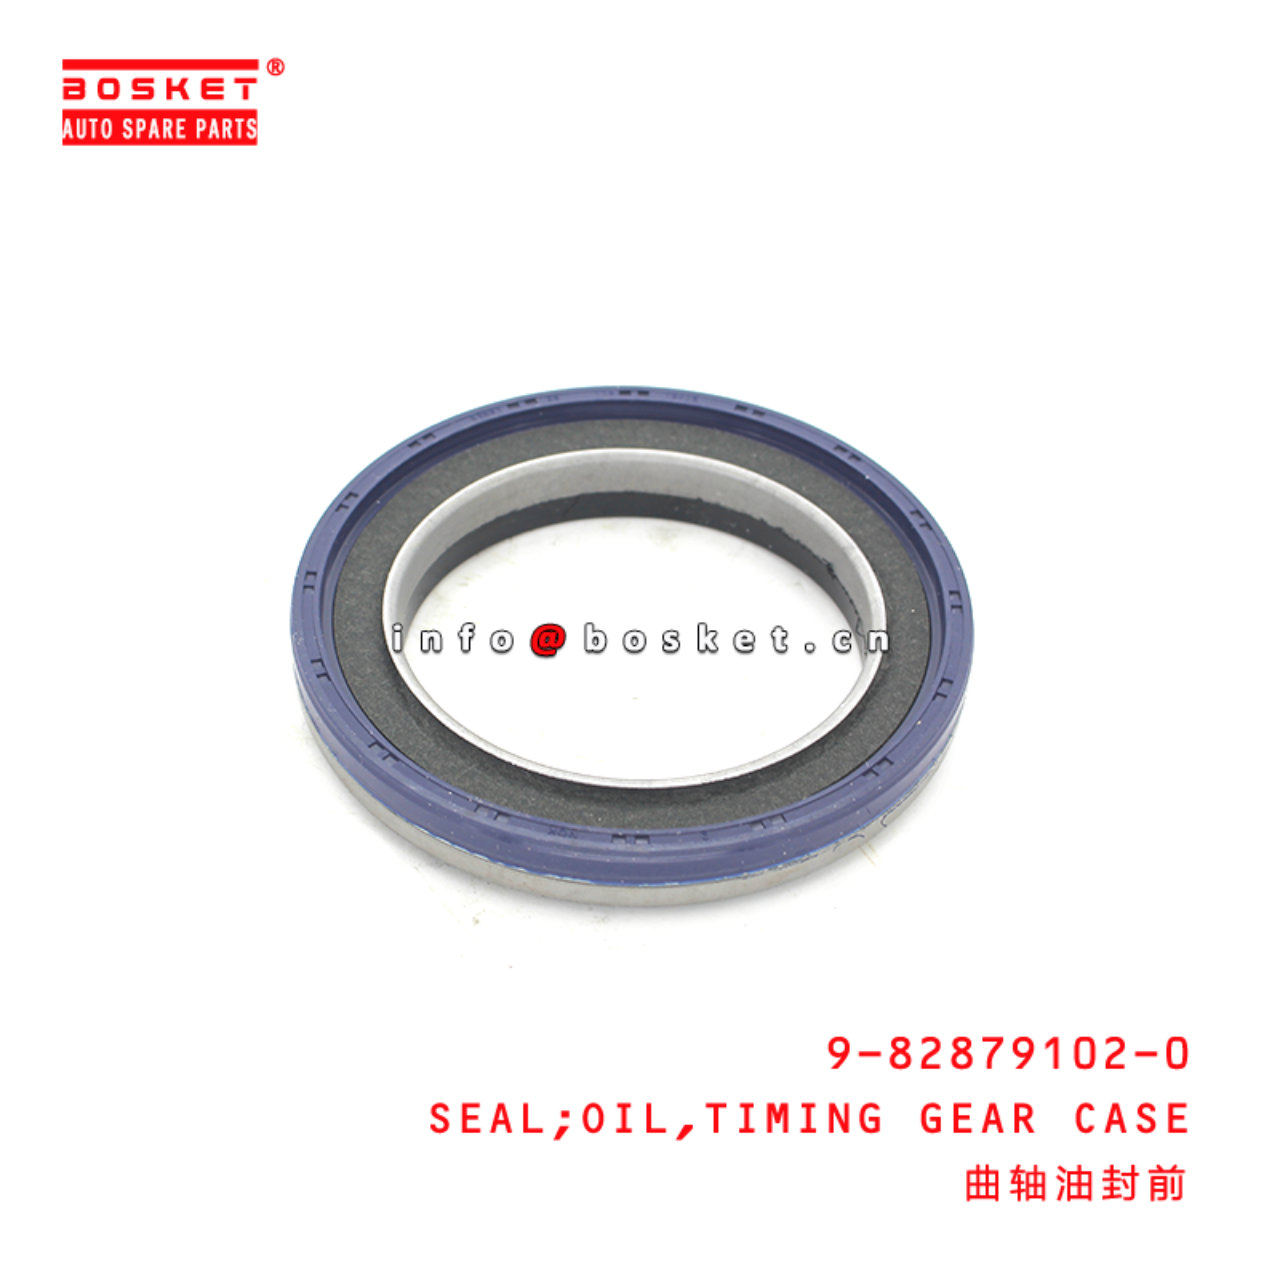 9-82879102-0 Timing Gear Case Oil Seal Suitable for ISUZU 9828791020